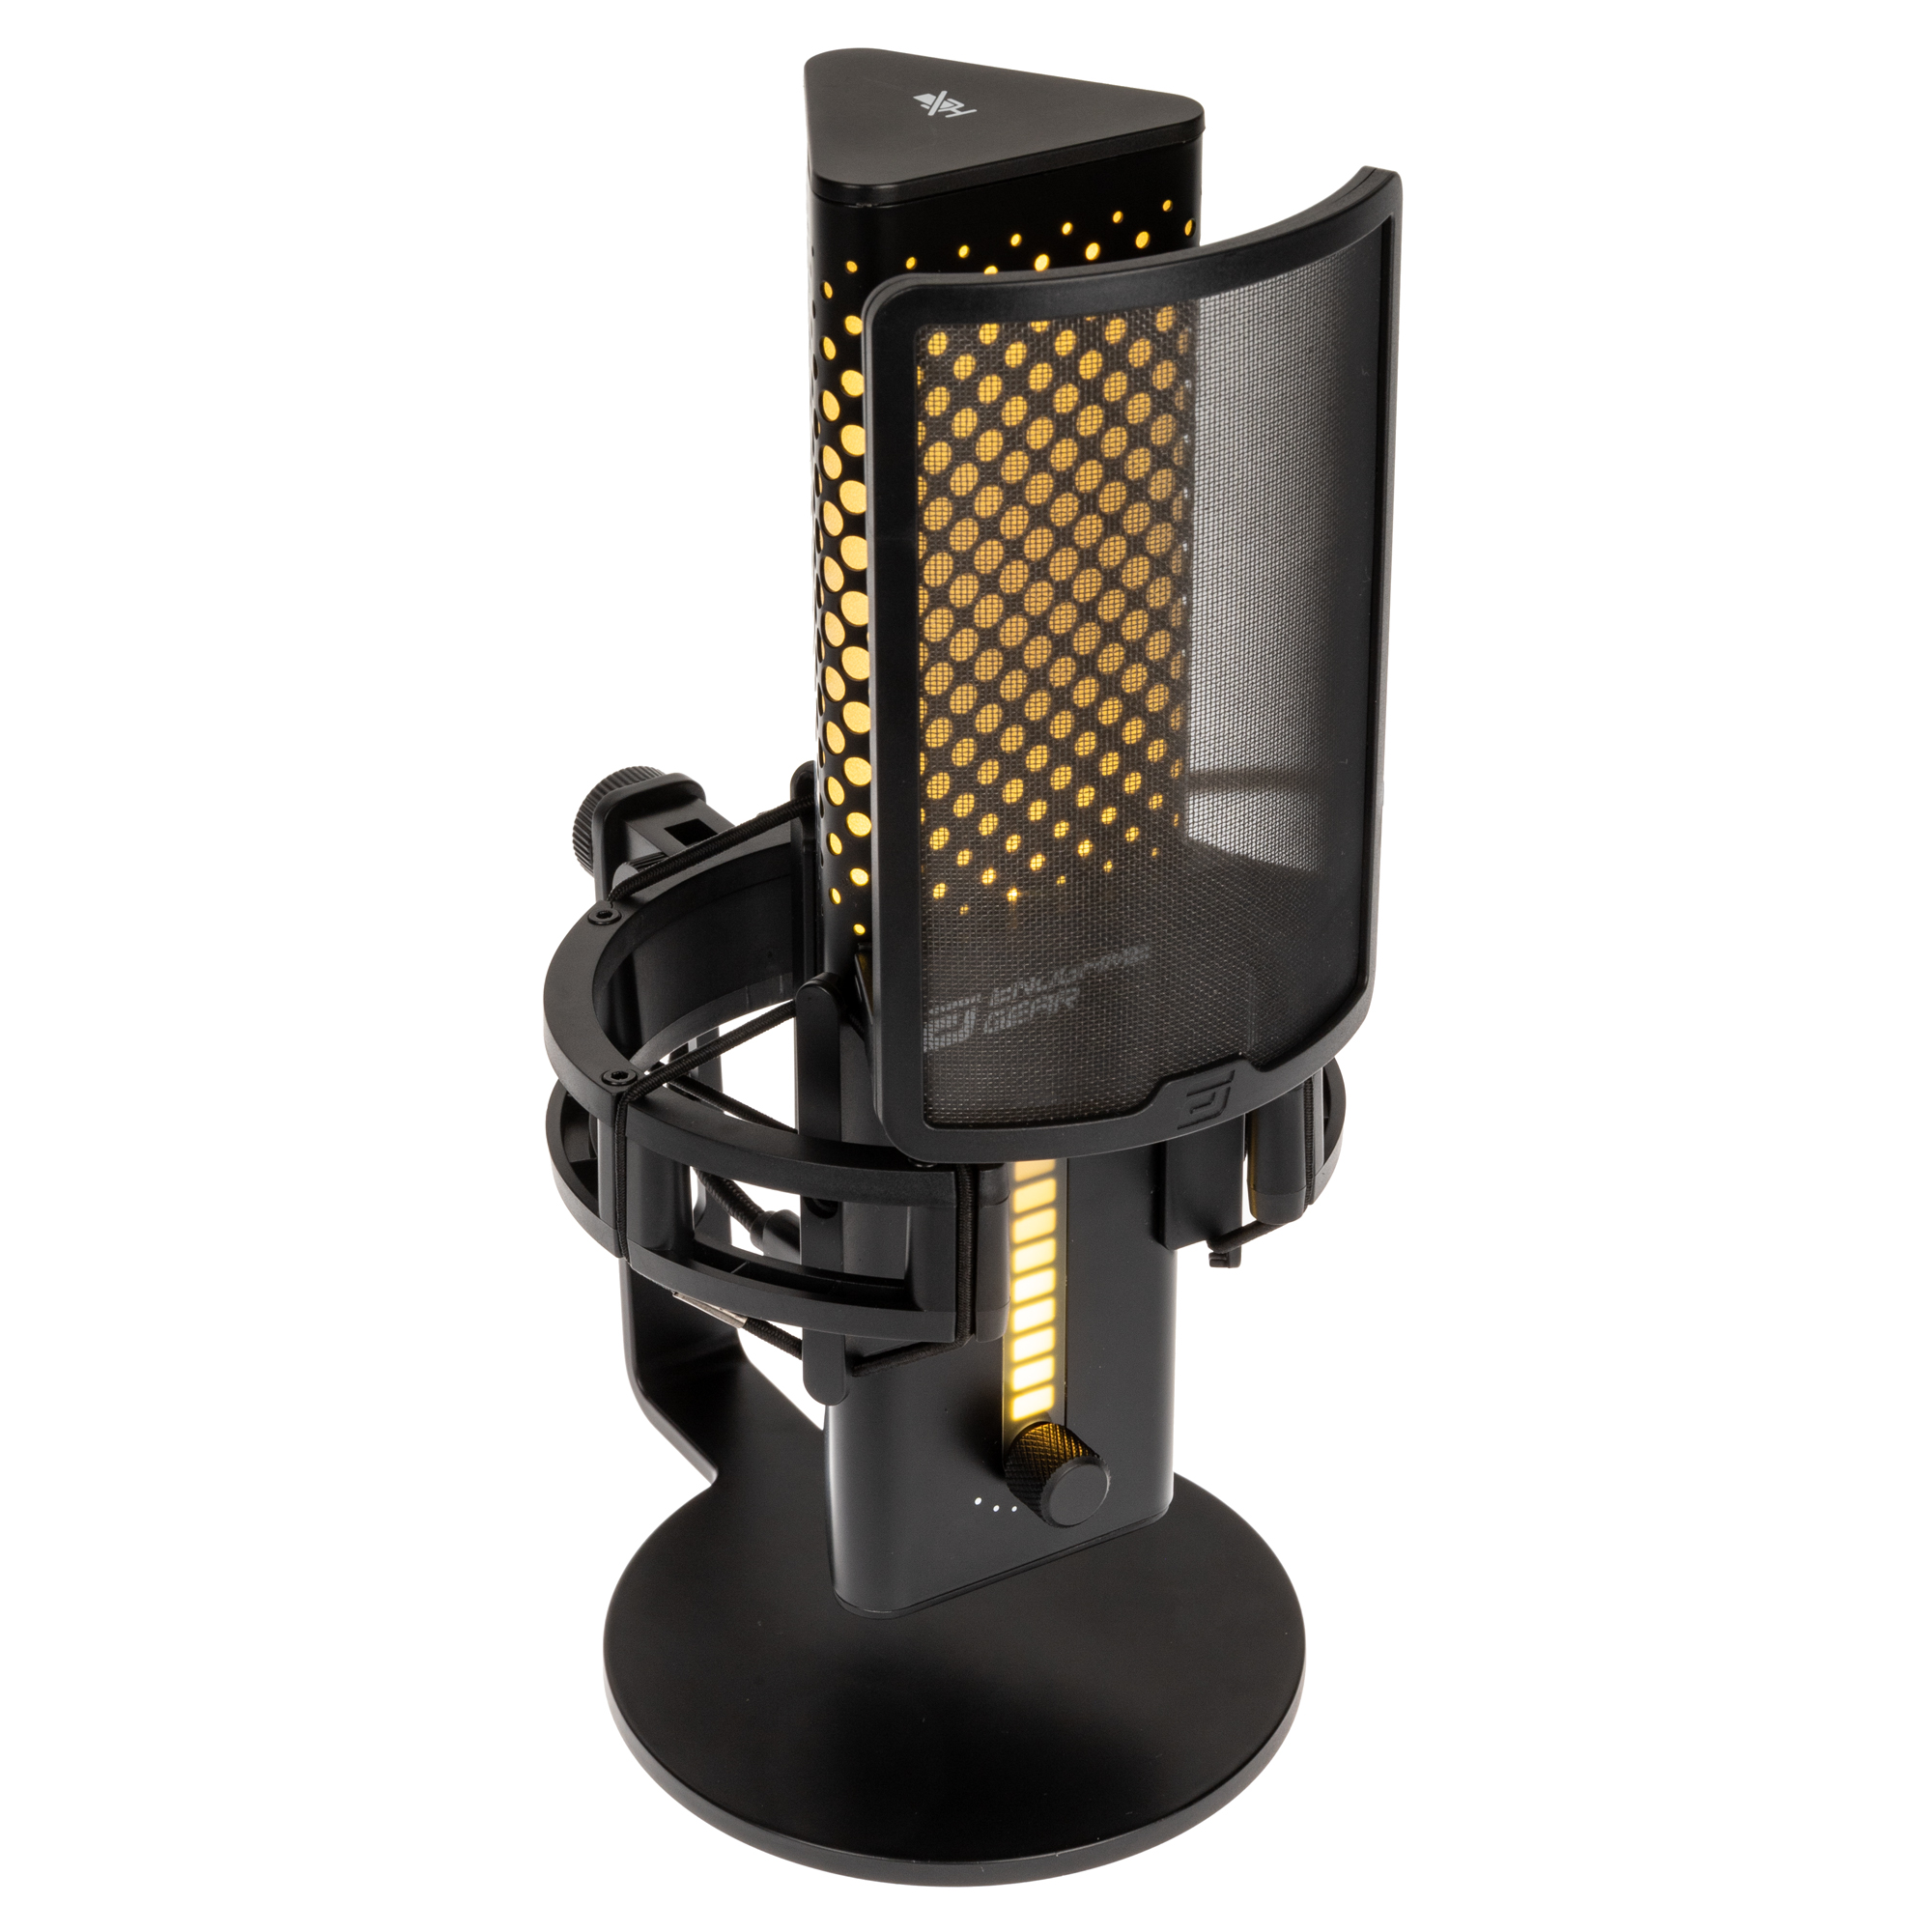 Endgame Gear XSTRM RGB USB Microphone with Shock Mount and Pop Filter - Black (EGG-XST-BLK)